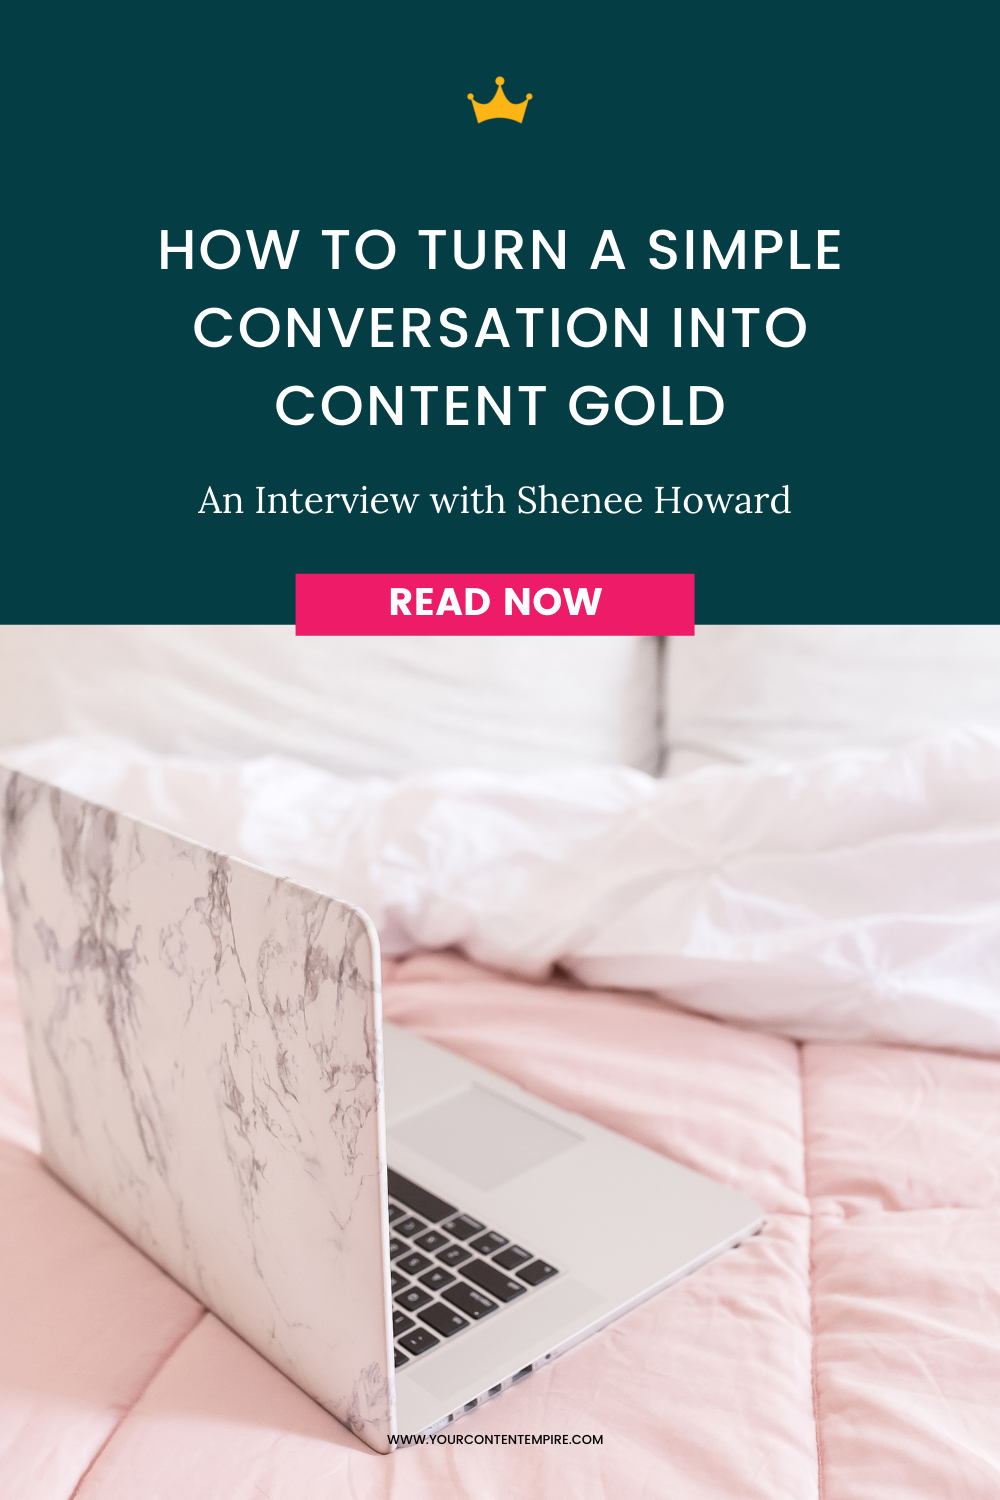 How to Turn A Simple Conversation into Content Gold